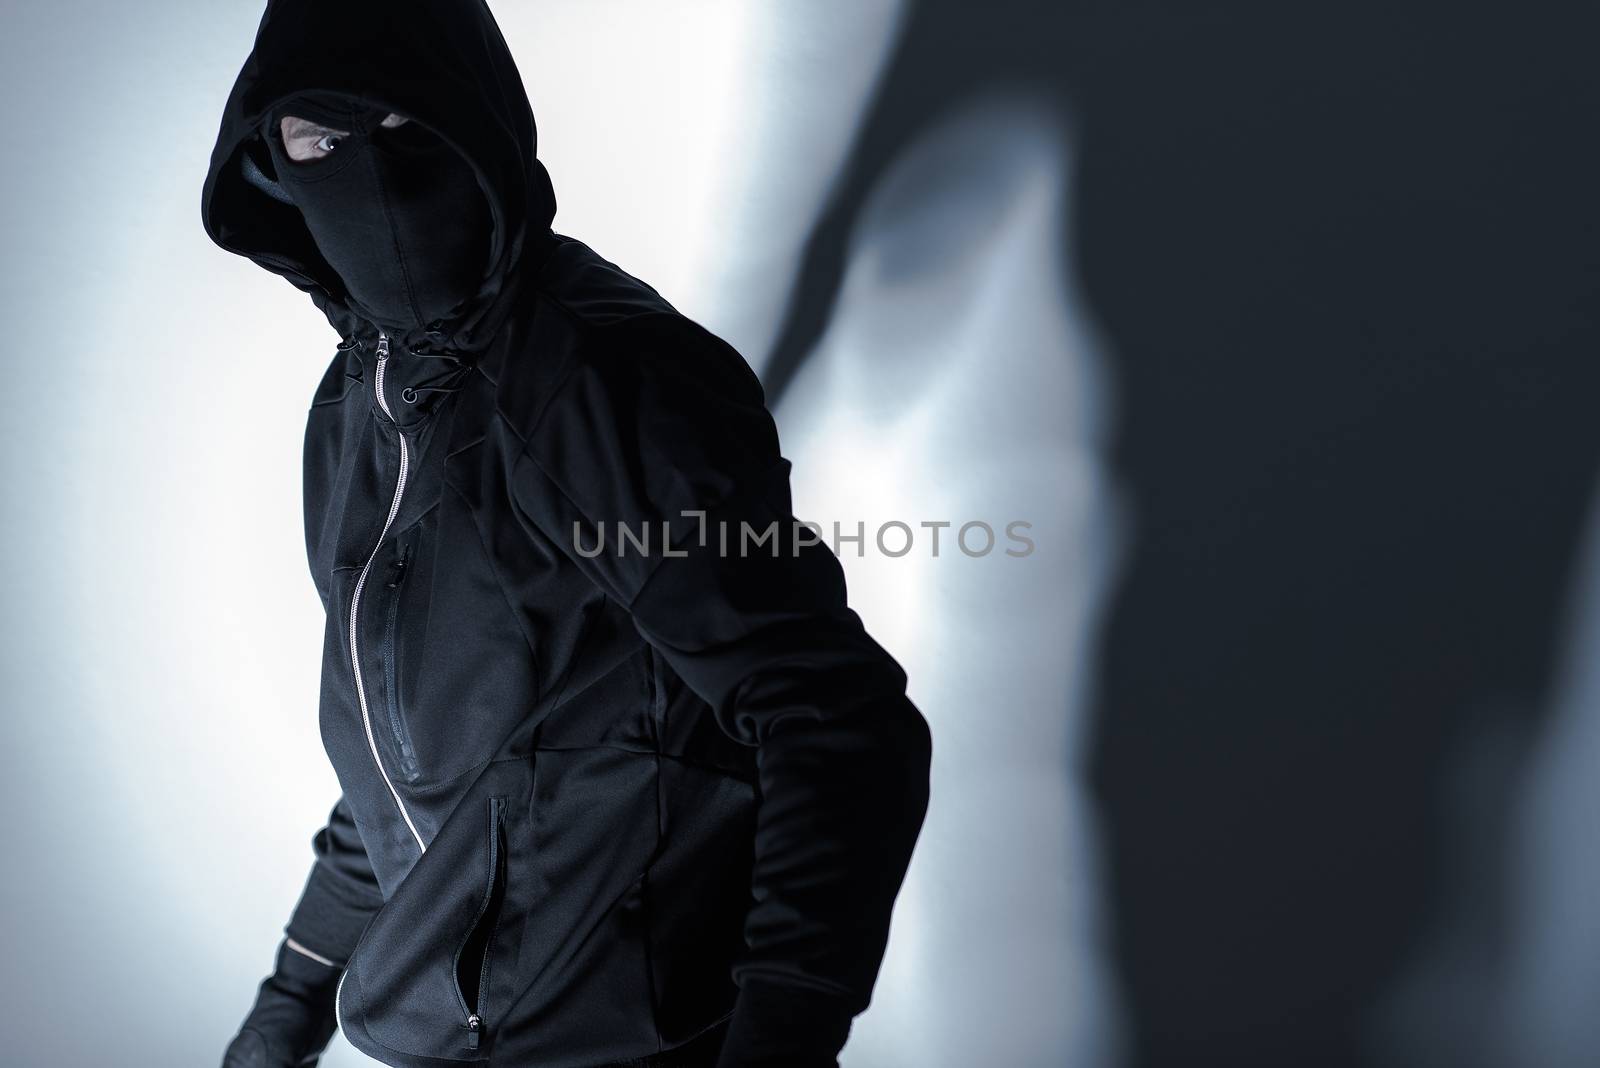 Robber in Black Mask by welcomia